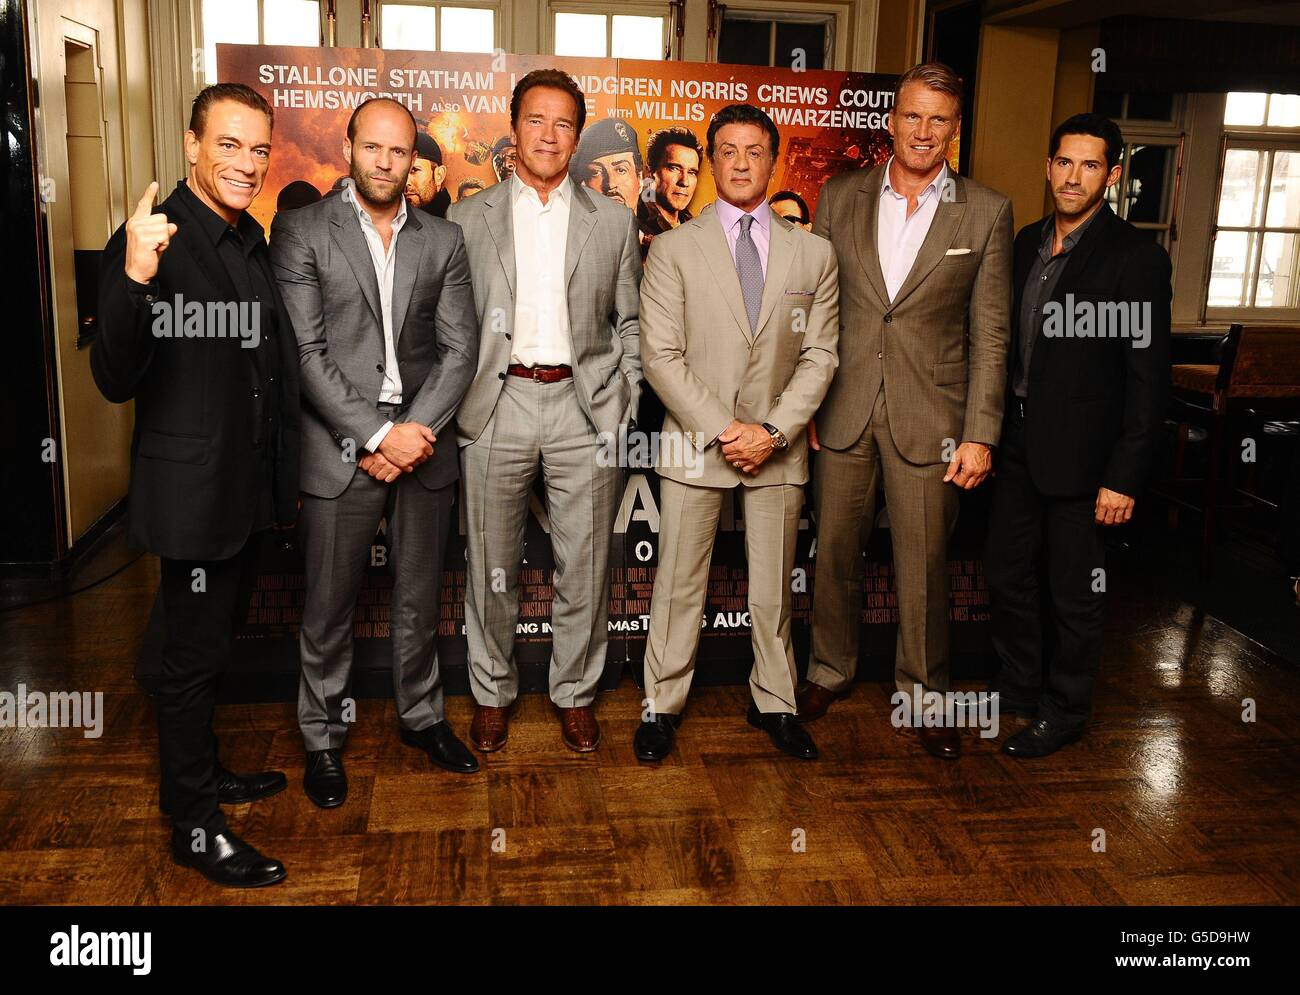 (left - right) Jean-Claude Van Damme, Jason Statham, Arnold Schwarzenegger, Sylvester Stallone, Dolph Lundgren and Scott Adkins at a photocall for new film The Expendables 2, at Simpsons-in-the-Strand, in central London. Stock Photo